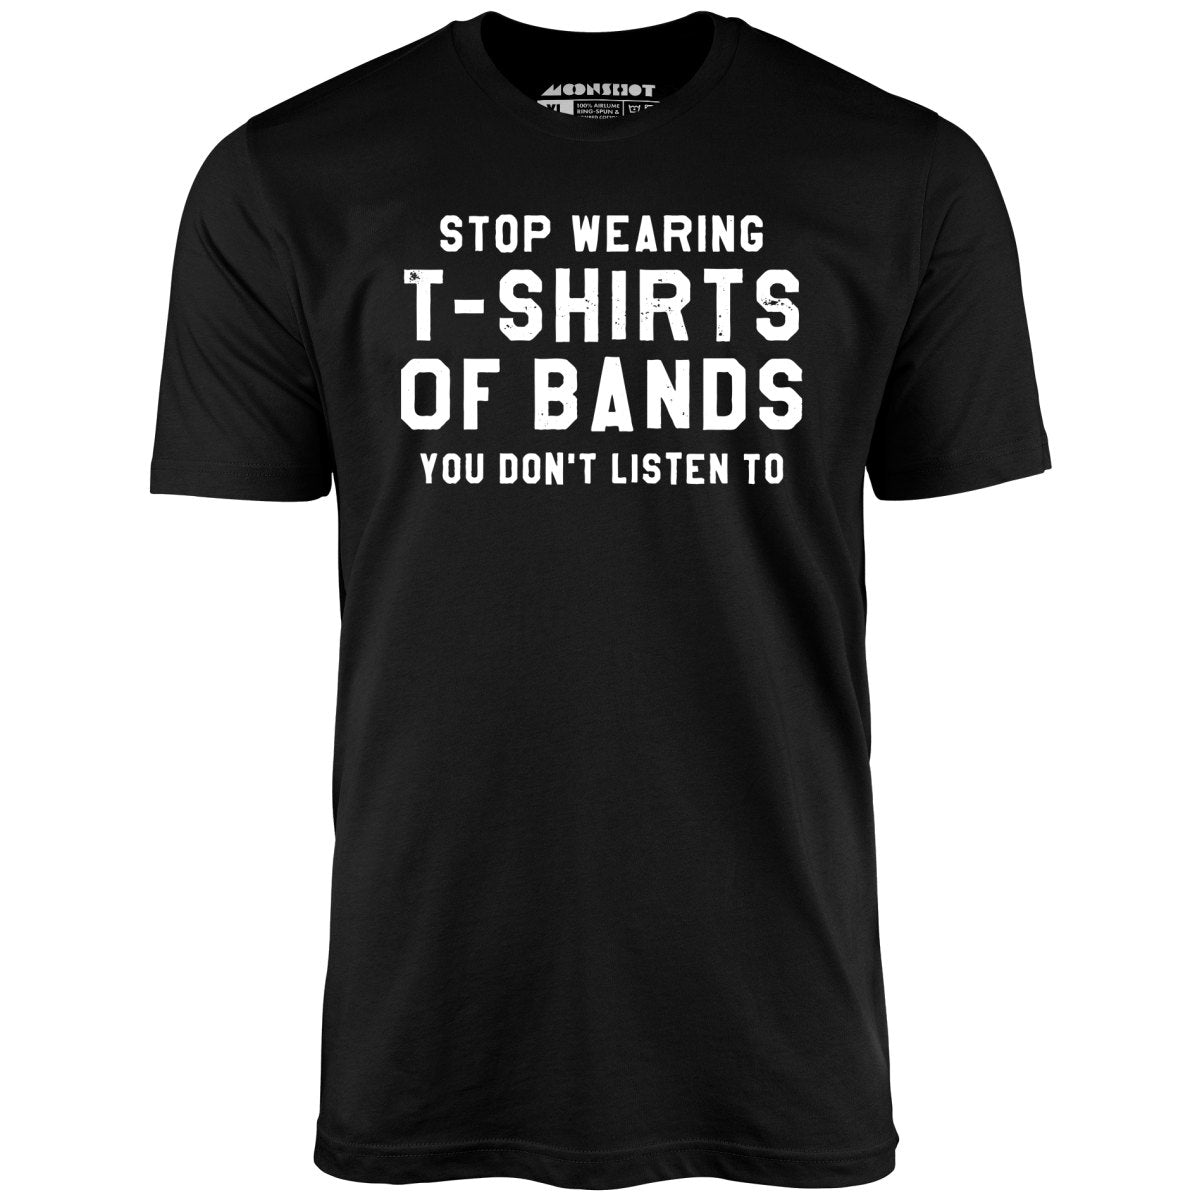 Stop Wearing T-Shirts of Bands You Don't Listen To - Unisex T-Shirt